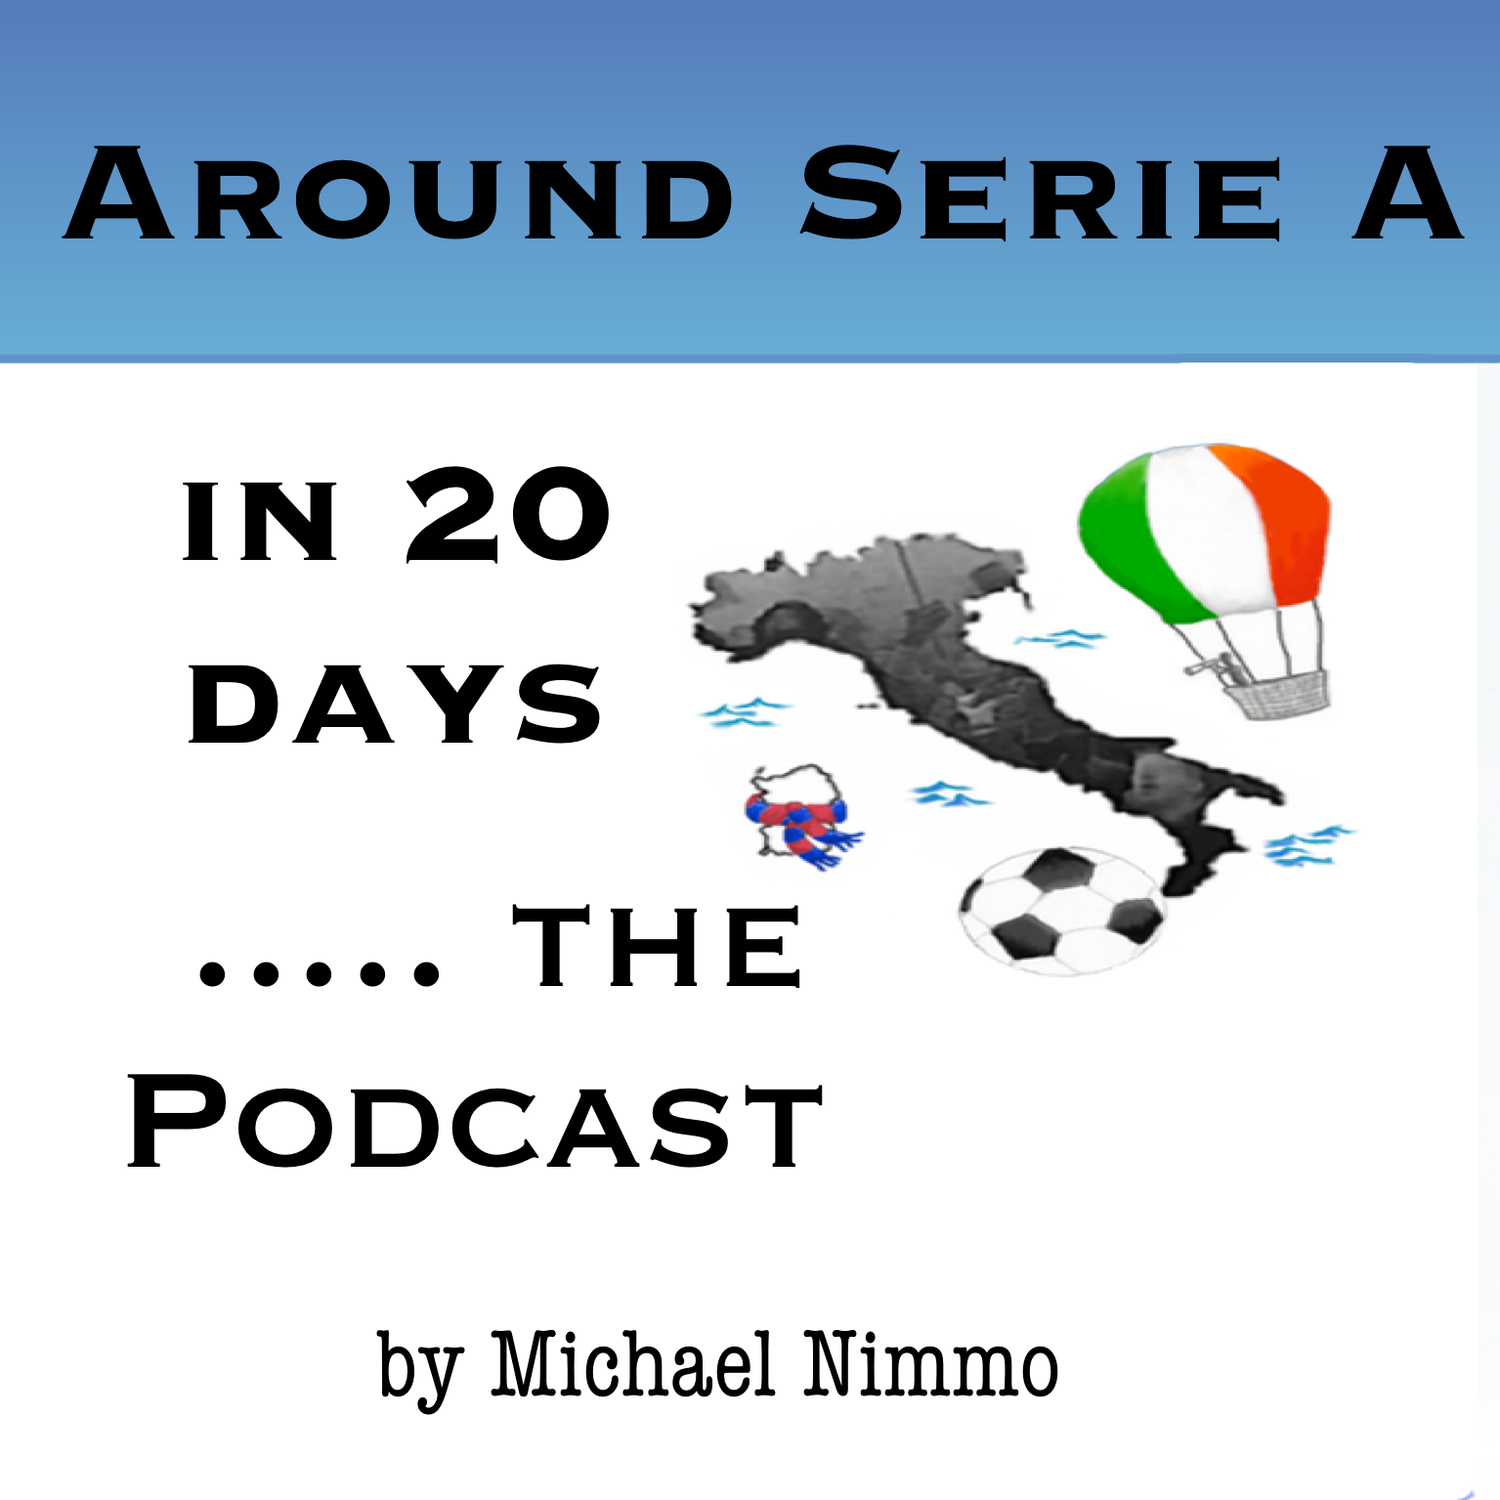 Around Serie A in 20 Days, Chapter 1 - Torino